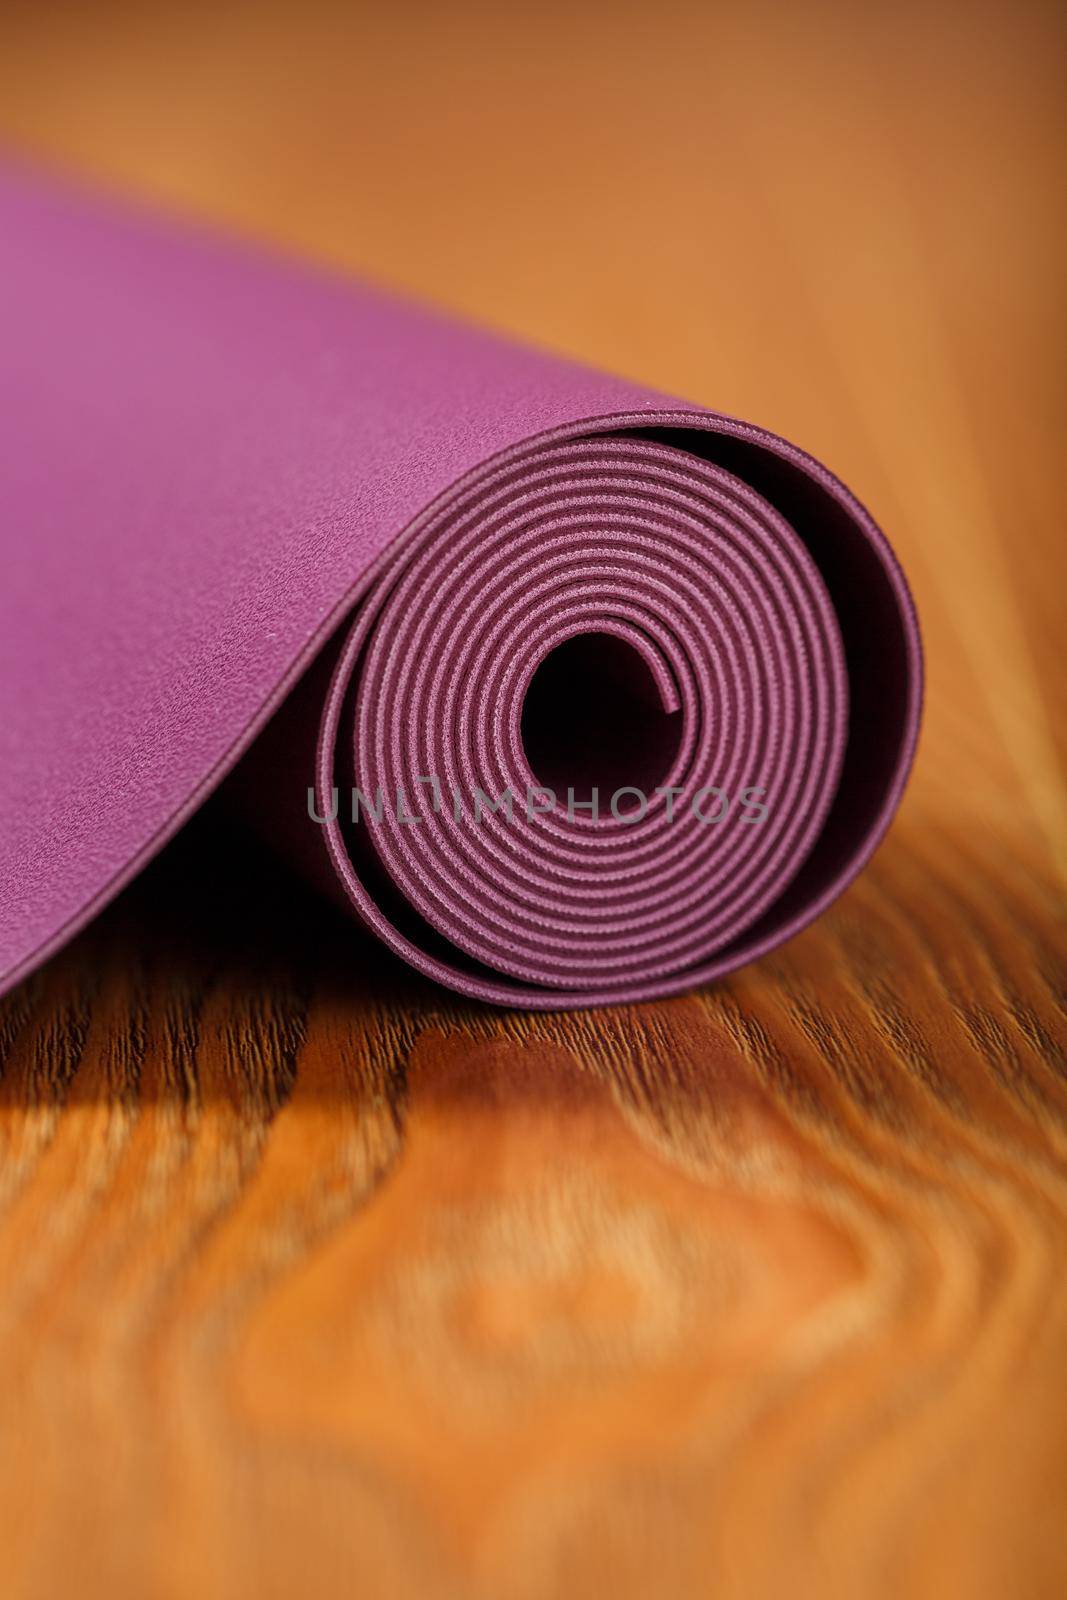 A lilac-colored yoga mat is spread out in a roll on the wooden floor. Close-up